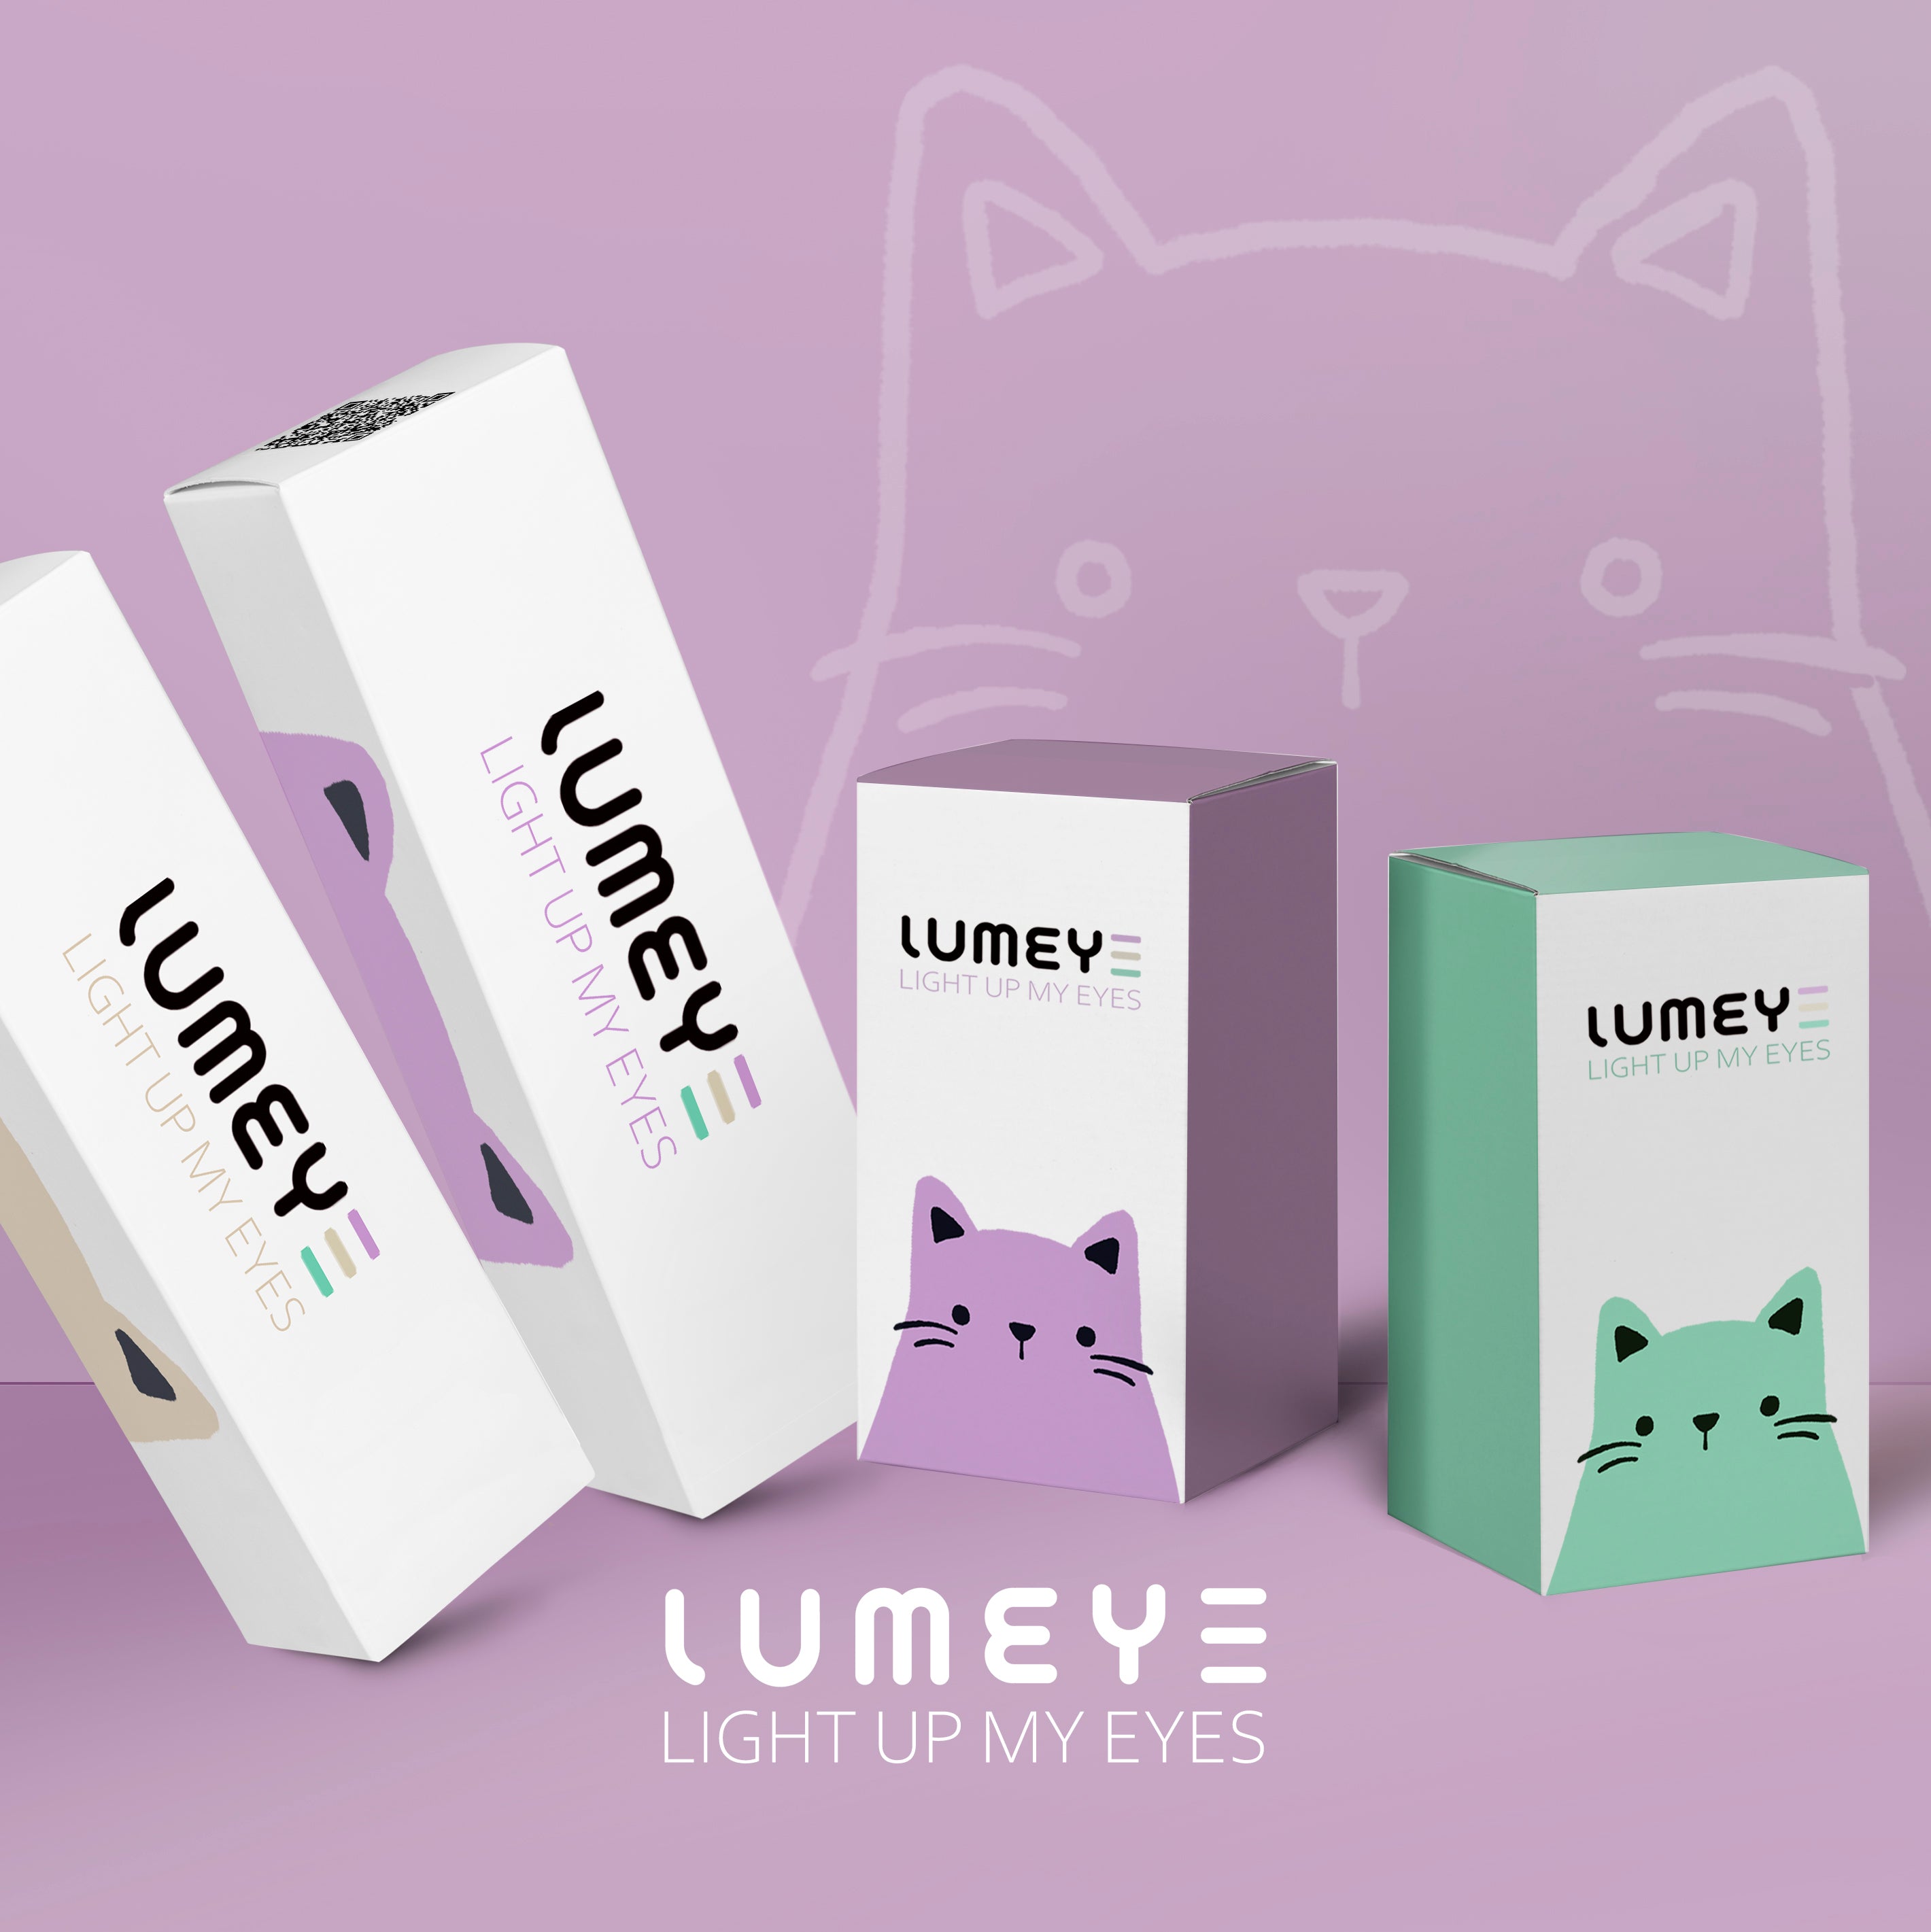 Best COLORED CONTACTS - LUMEYE Tequila Gray Colored Contact Lenses - LUMEYE